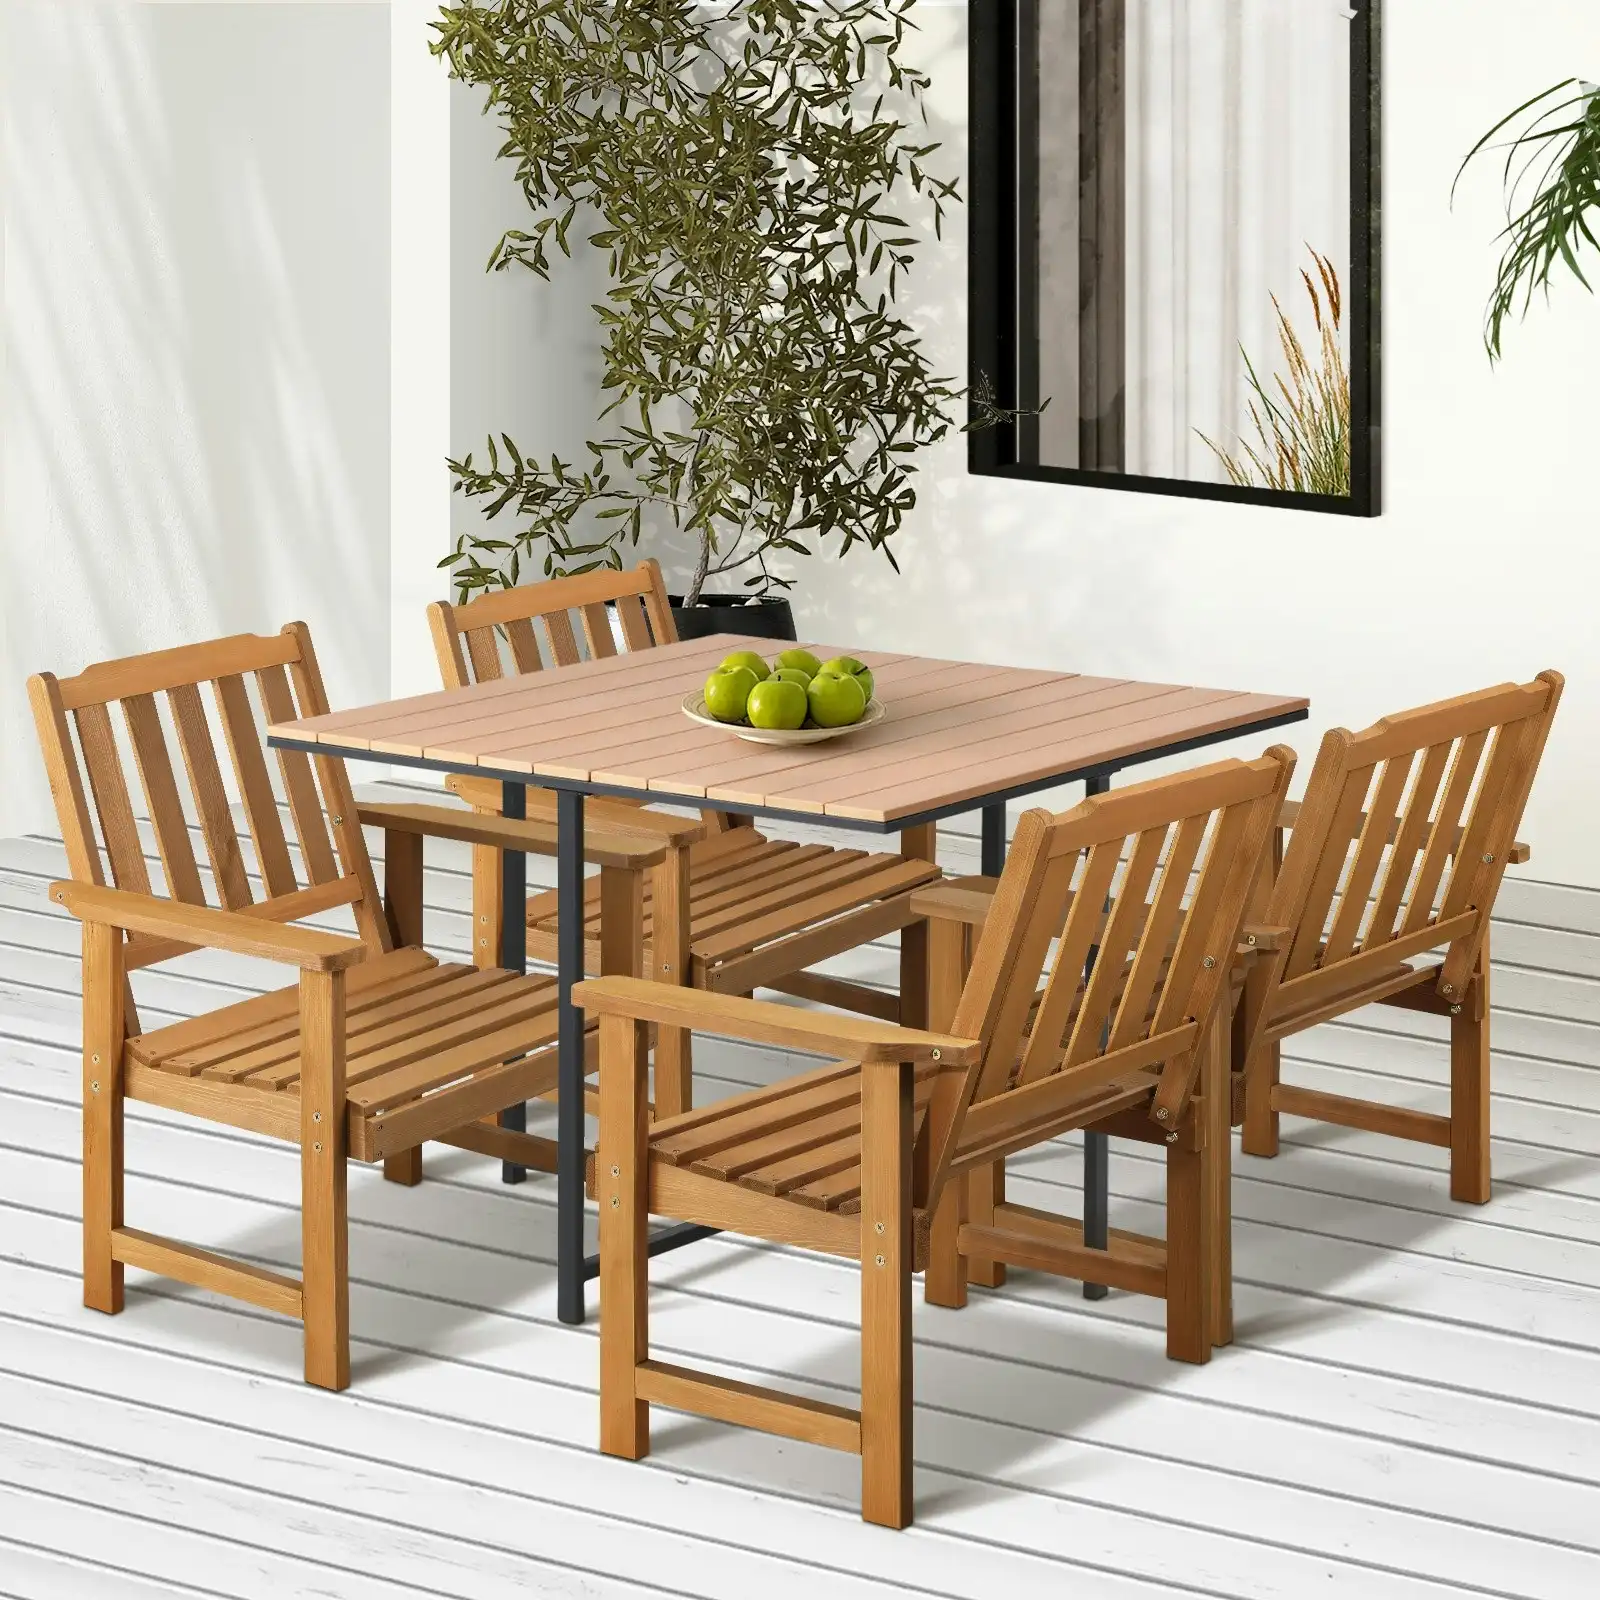 Livsip 4 Seater Outdoor Dining Set Furniture Table & Wood Chairs Patio Setting